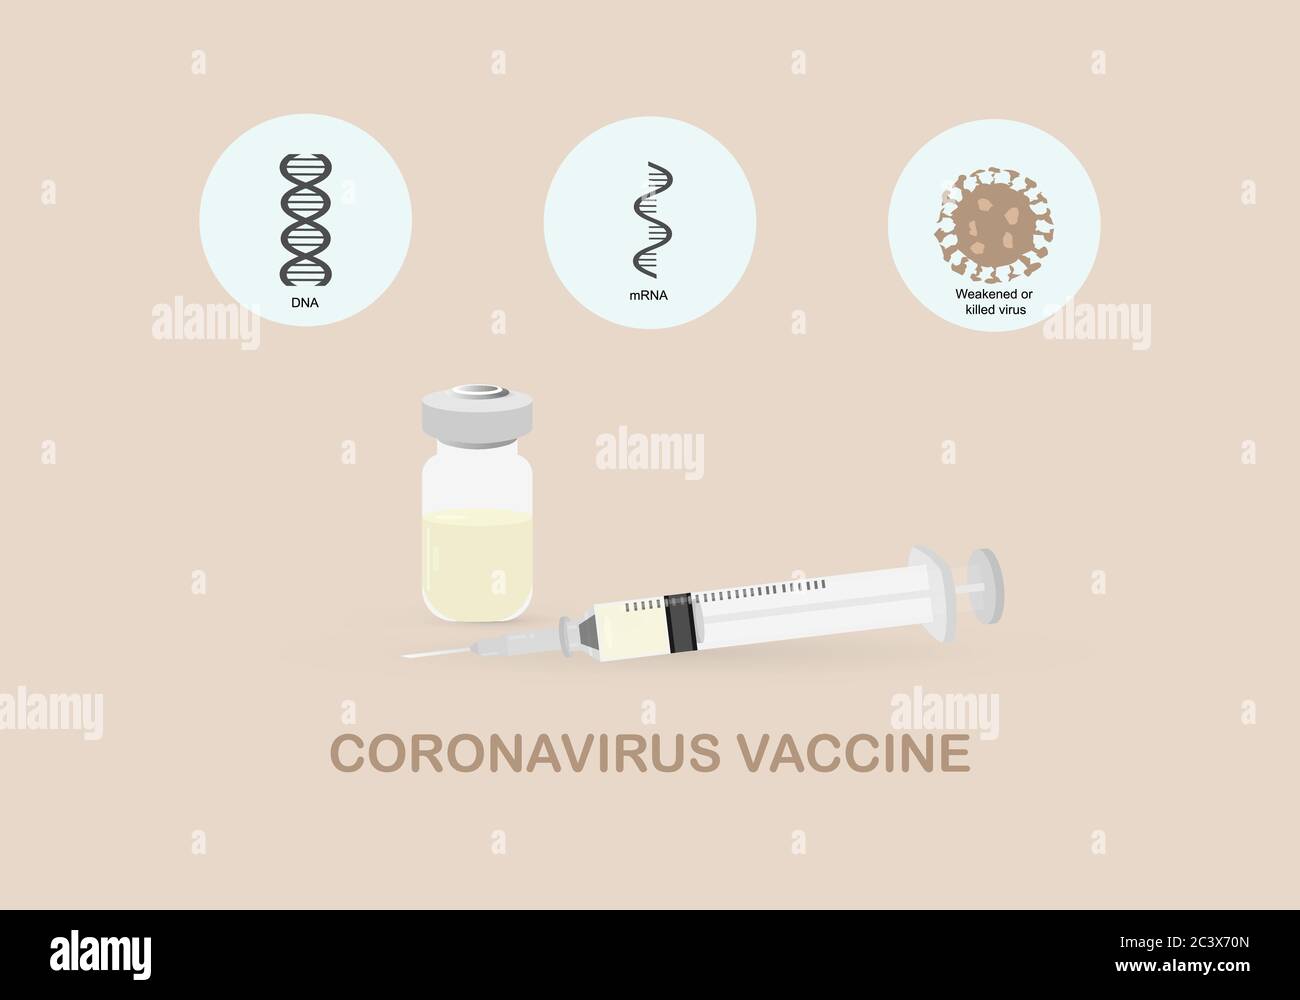 Concepts of different types of coronavirus vaccine. Vaccine may be made from DNA, mRNA or weakened or killed virus. Stock Vector